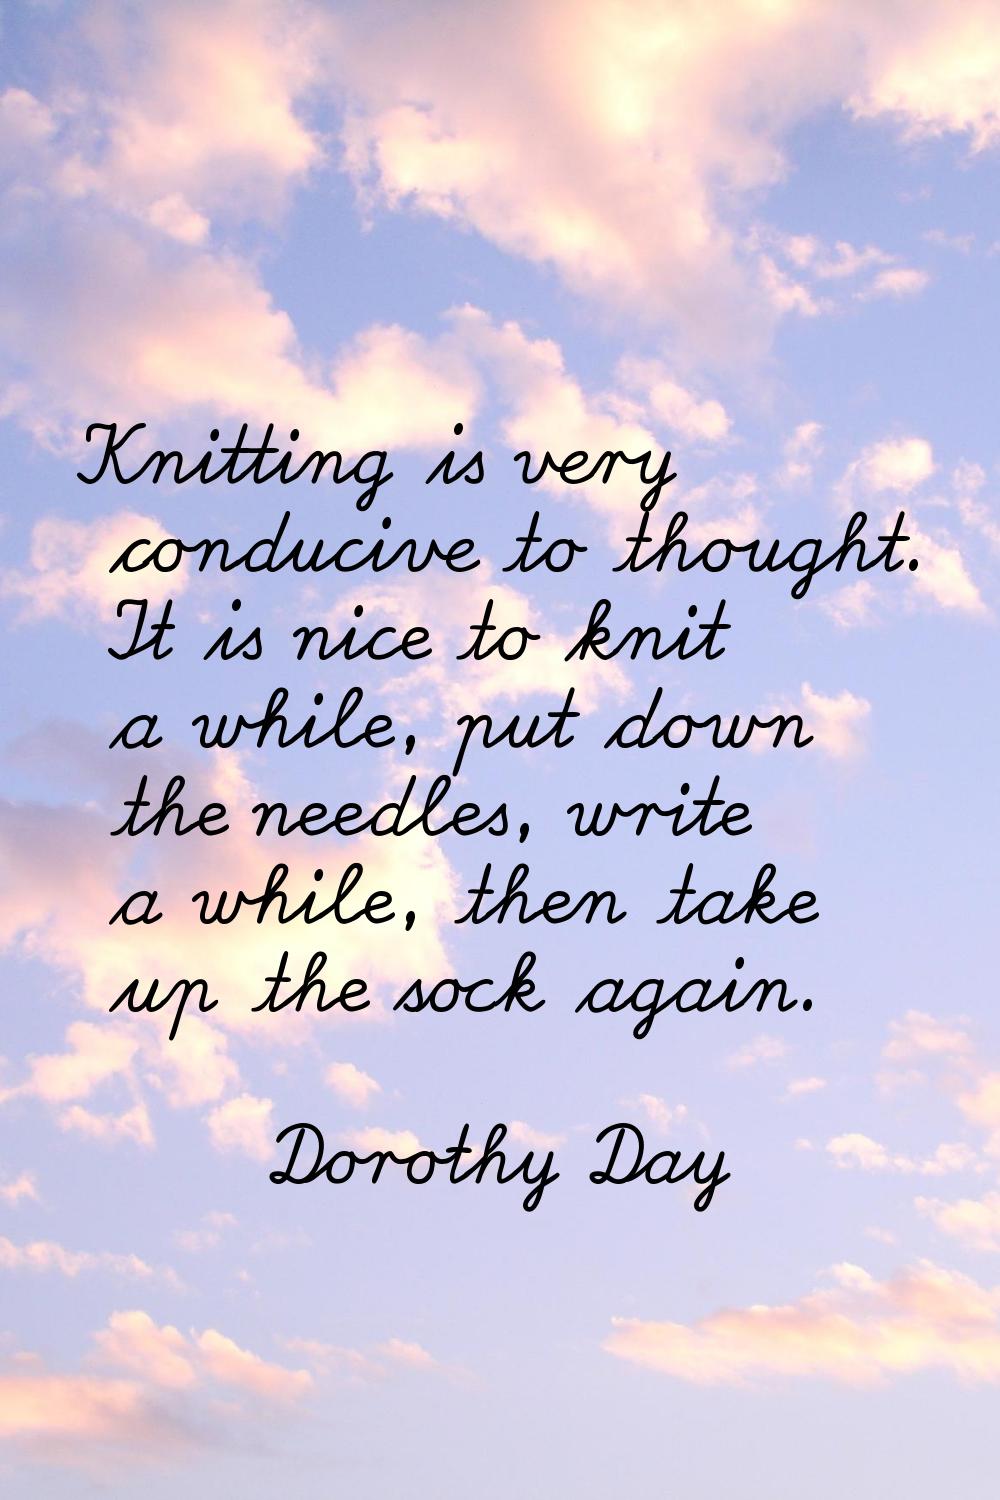 Knitting is very conducive to thought. It is nice to knit a while, put down the needles, write a wh